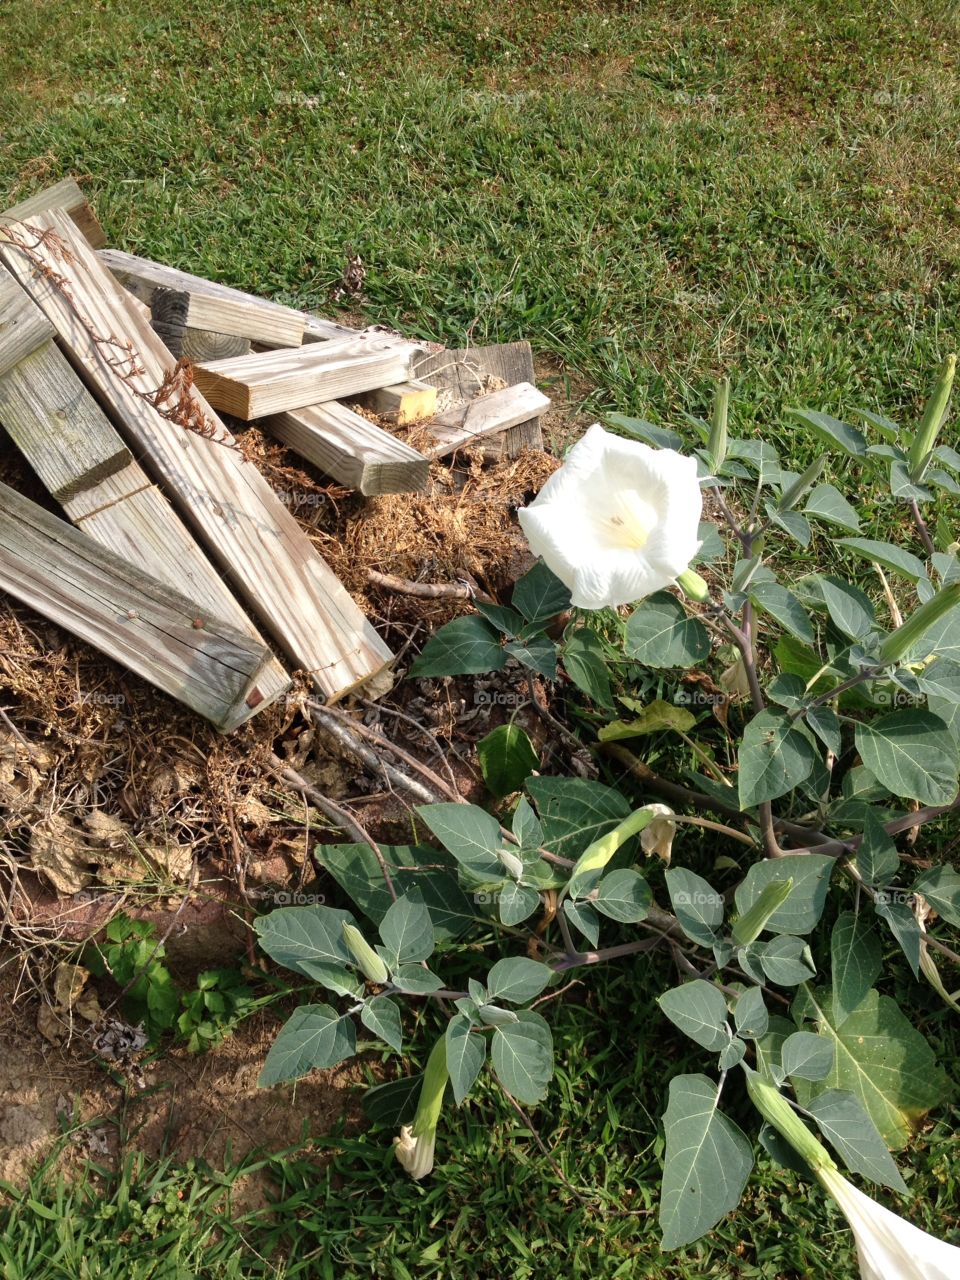 Moonflower in bloom next to a pile of wood 